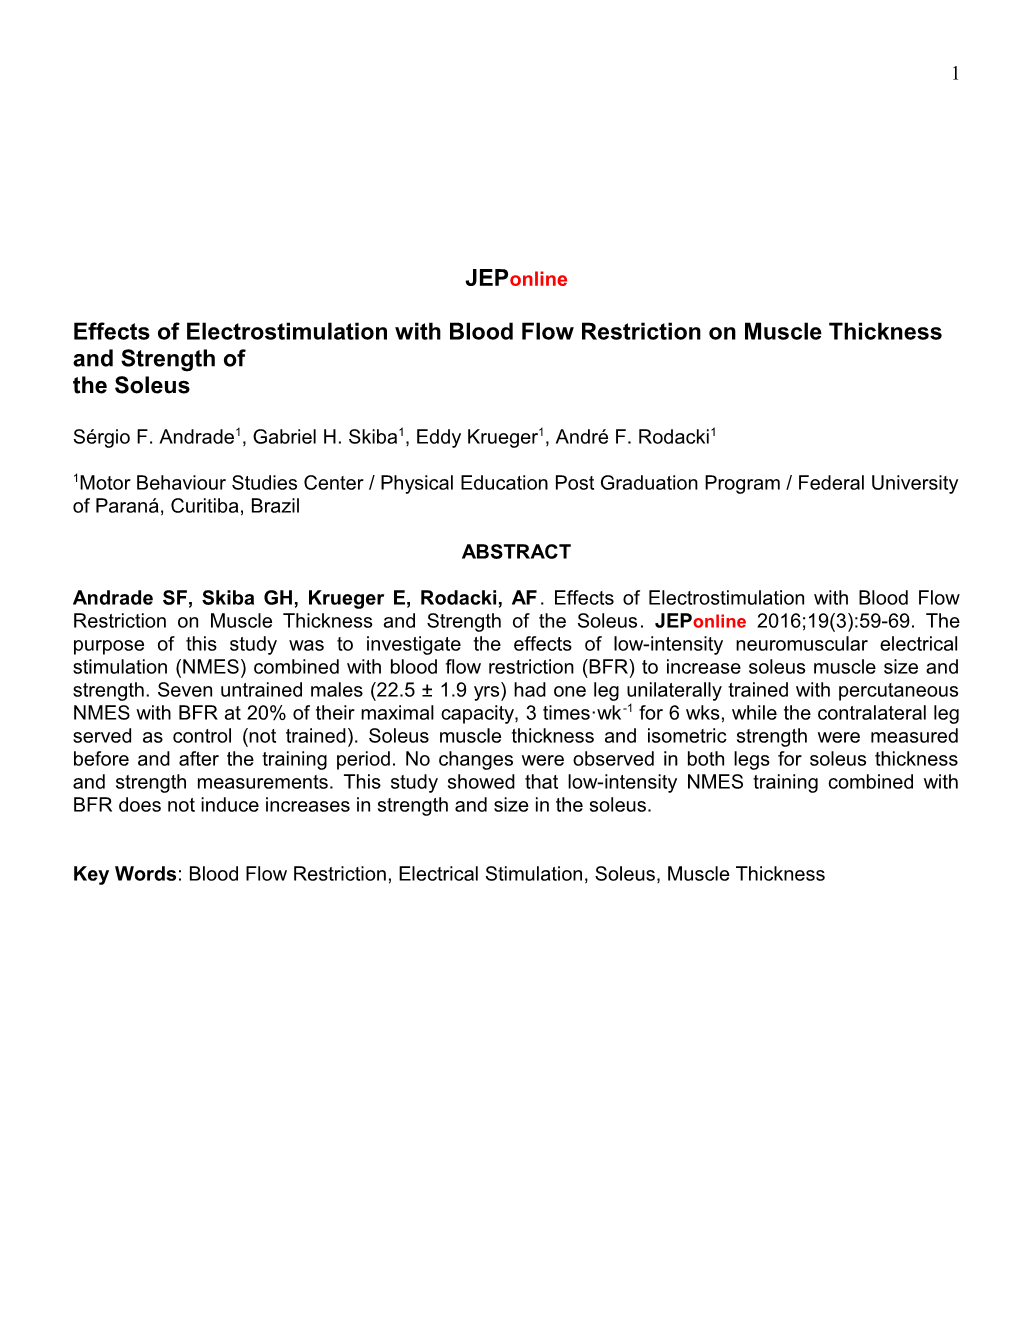 Effects of Electrostimulation with Blood Flow Restriction on Muscle Thickness and Strength Of